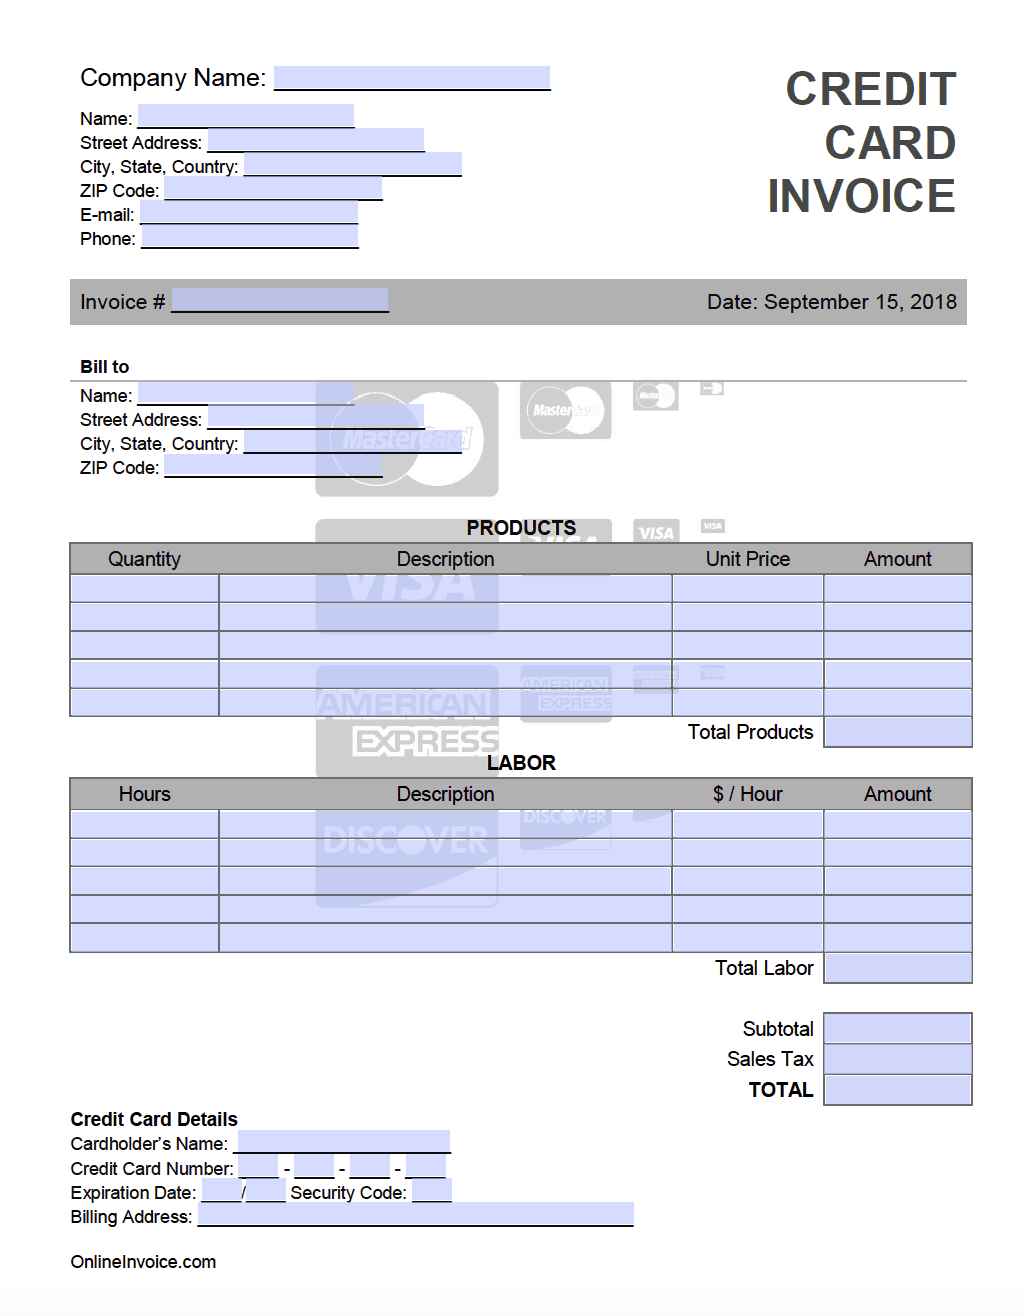 Credit Card Invoice Template - Onlineinvoice Pertaining To Credit Card Bill Template